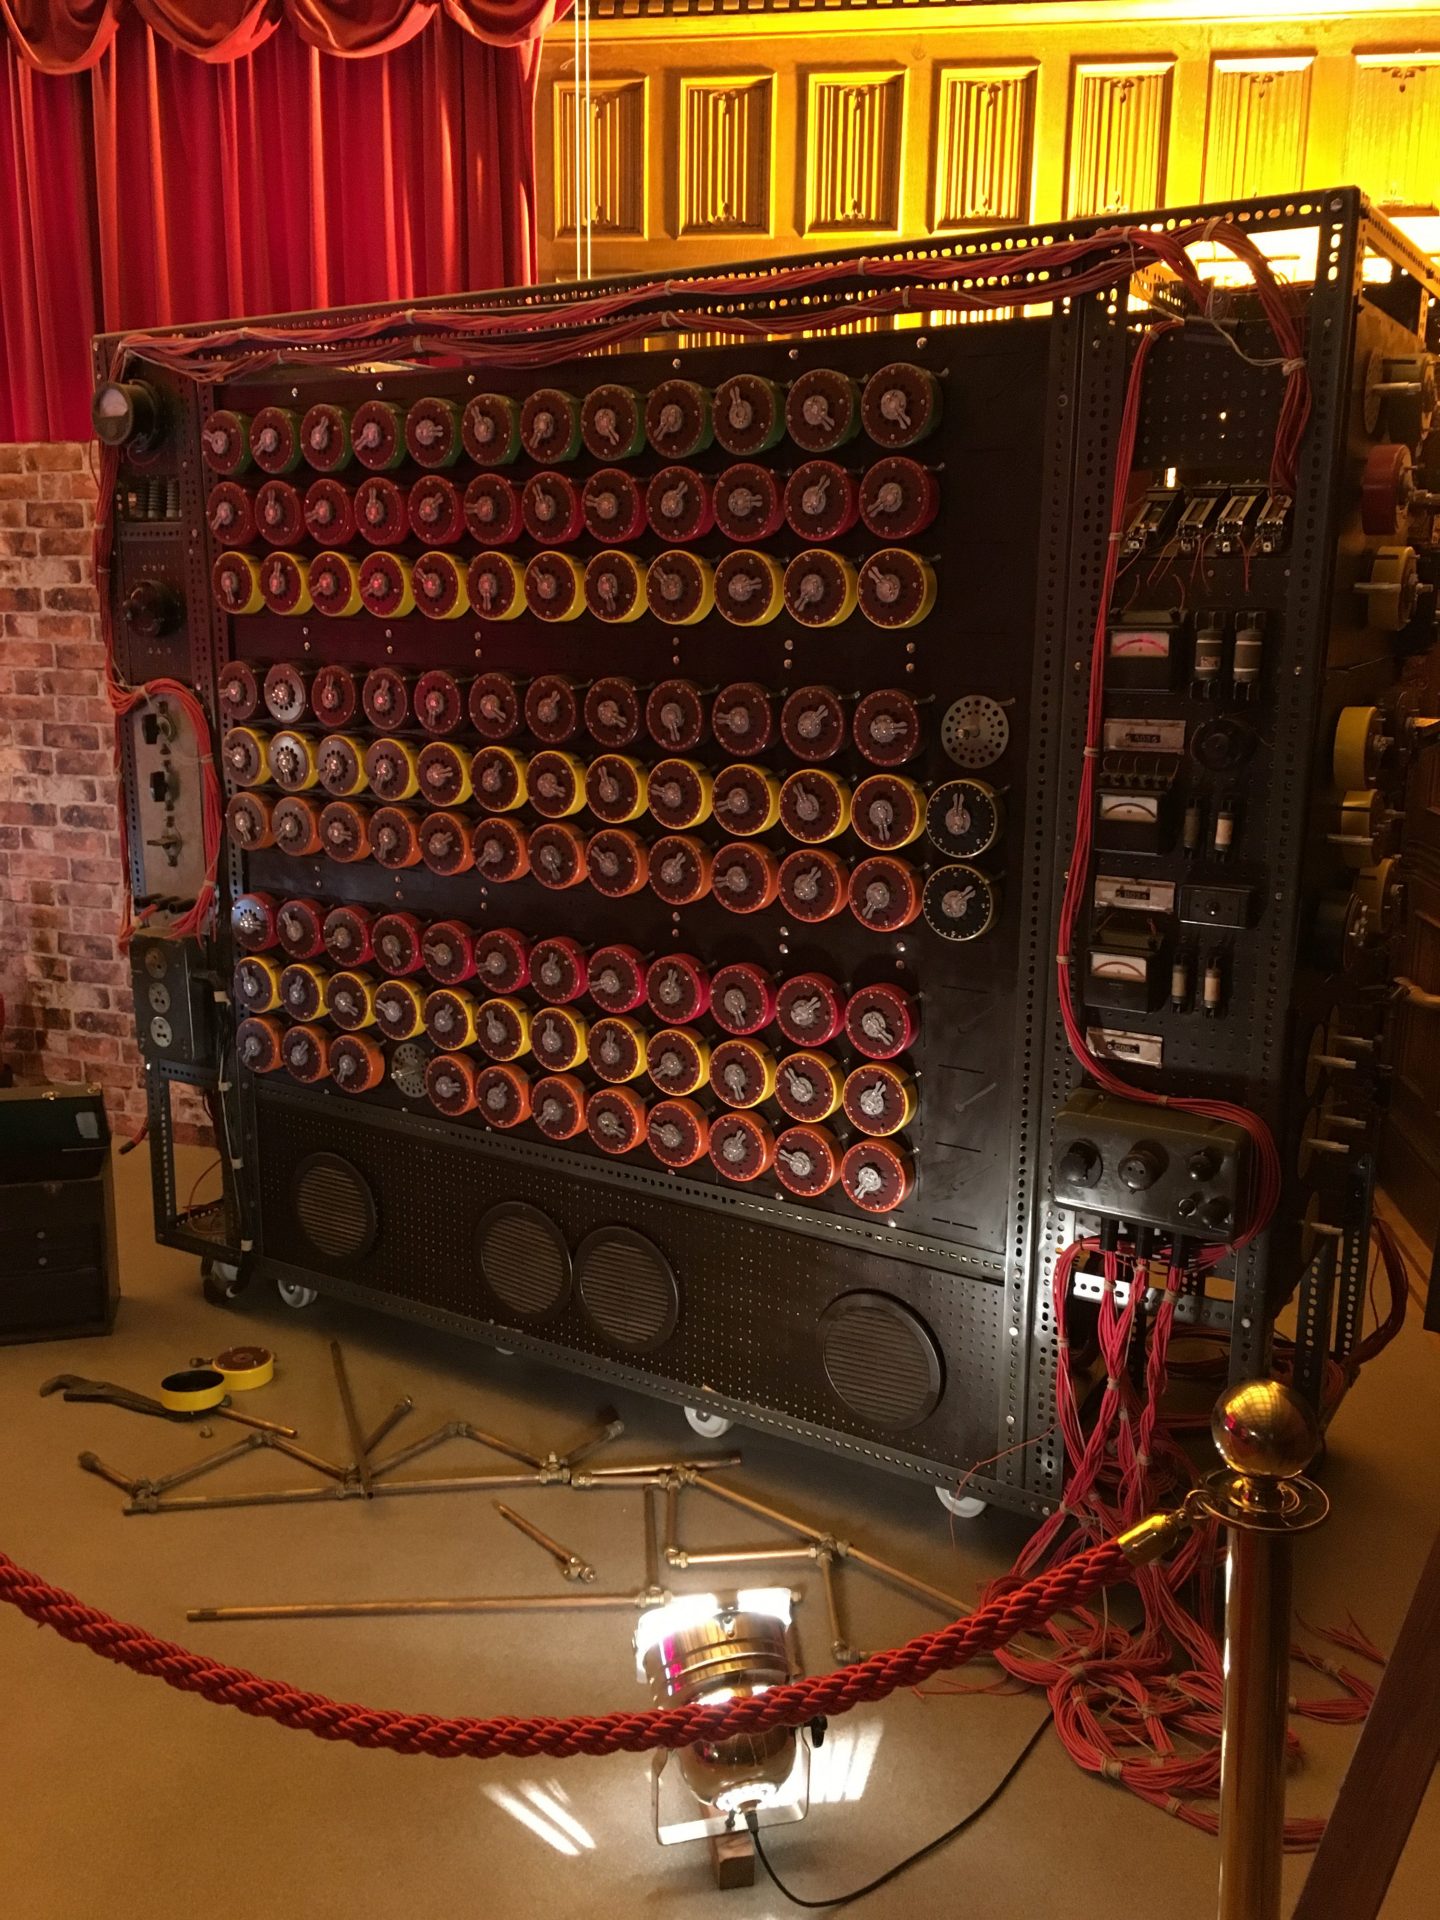 The Turing Bombe